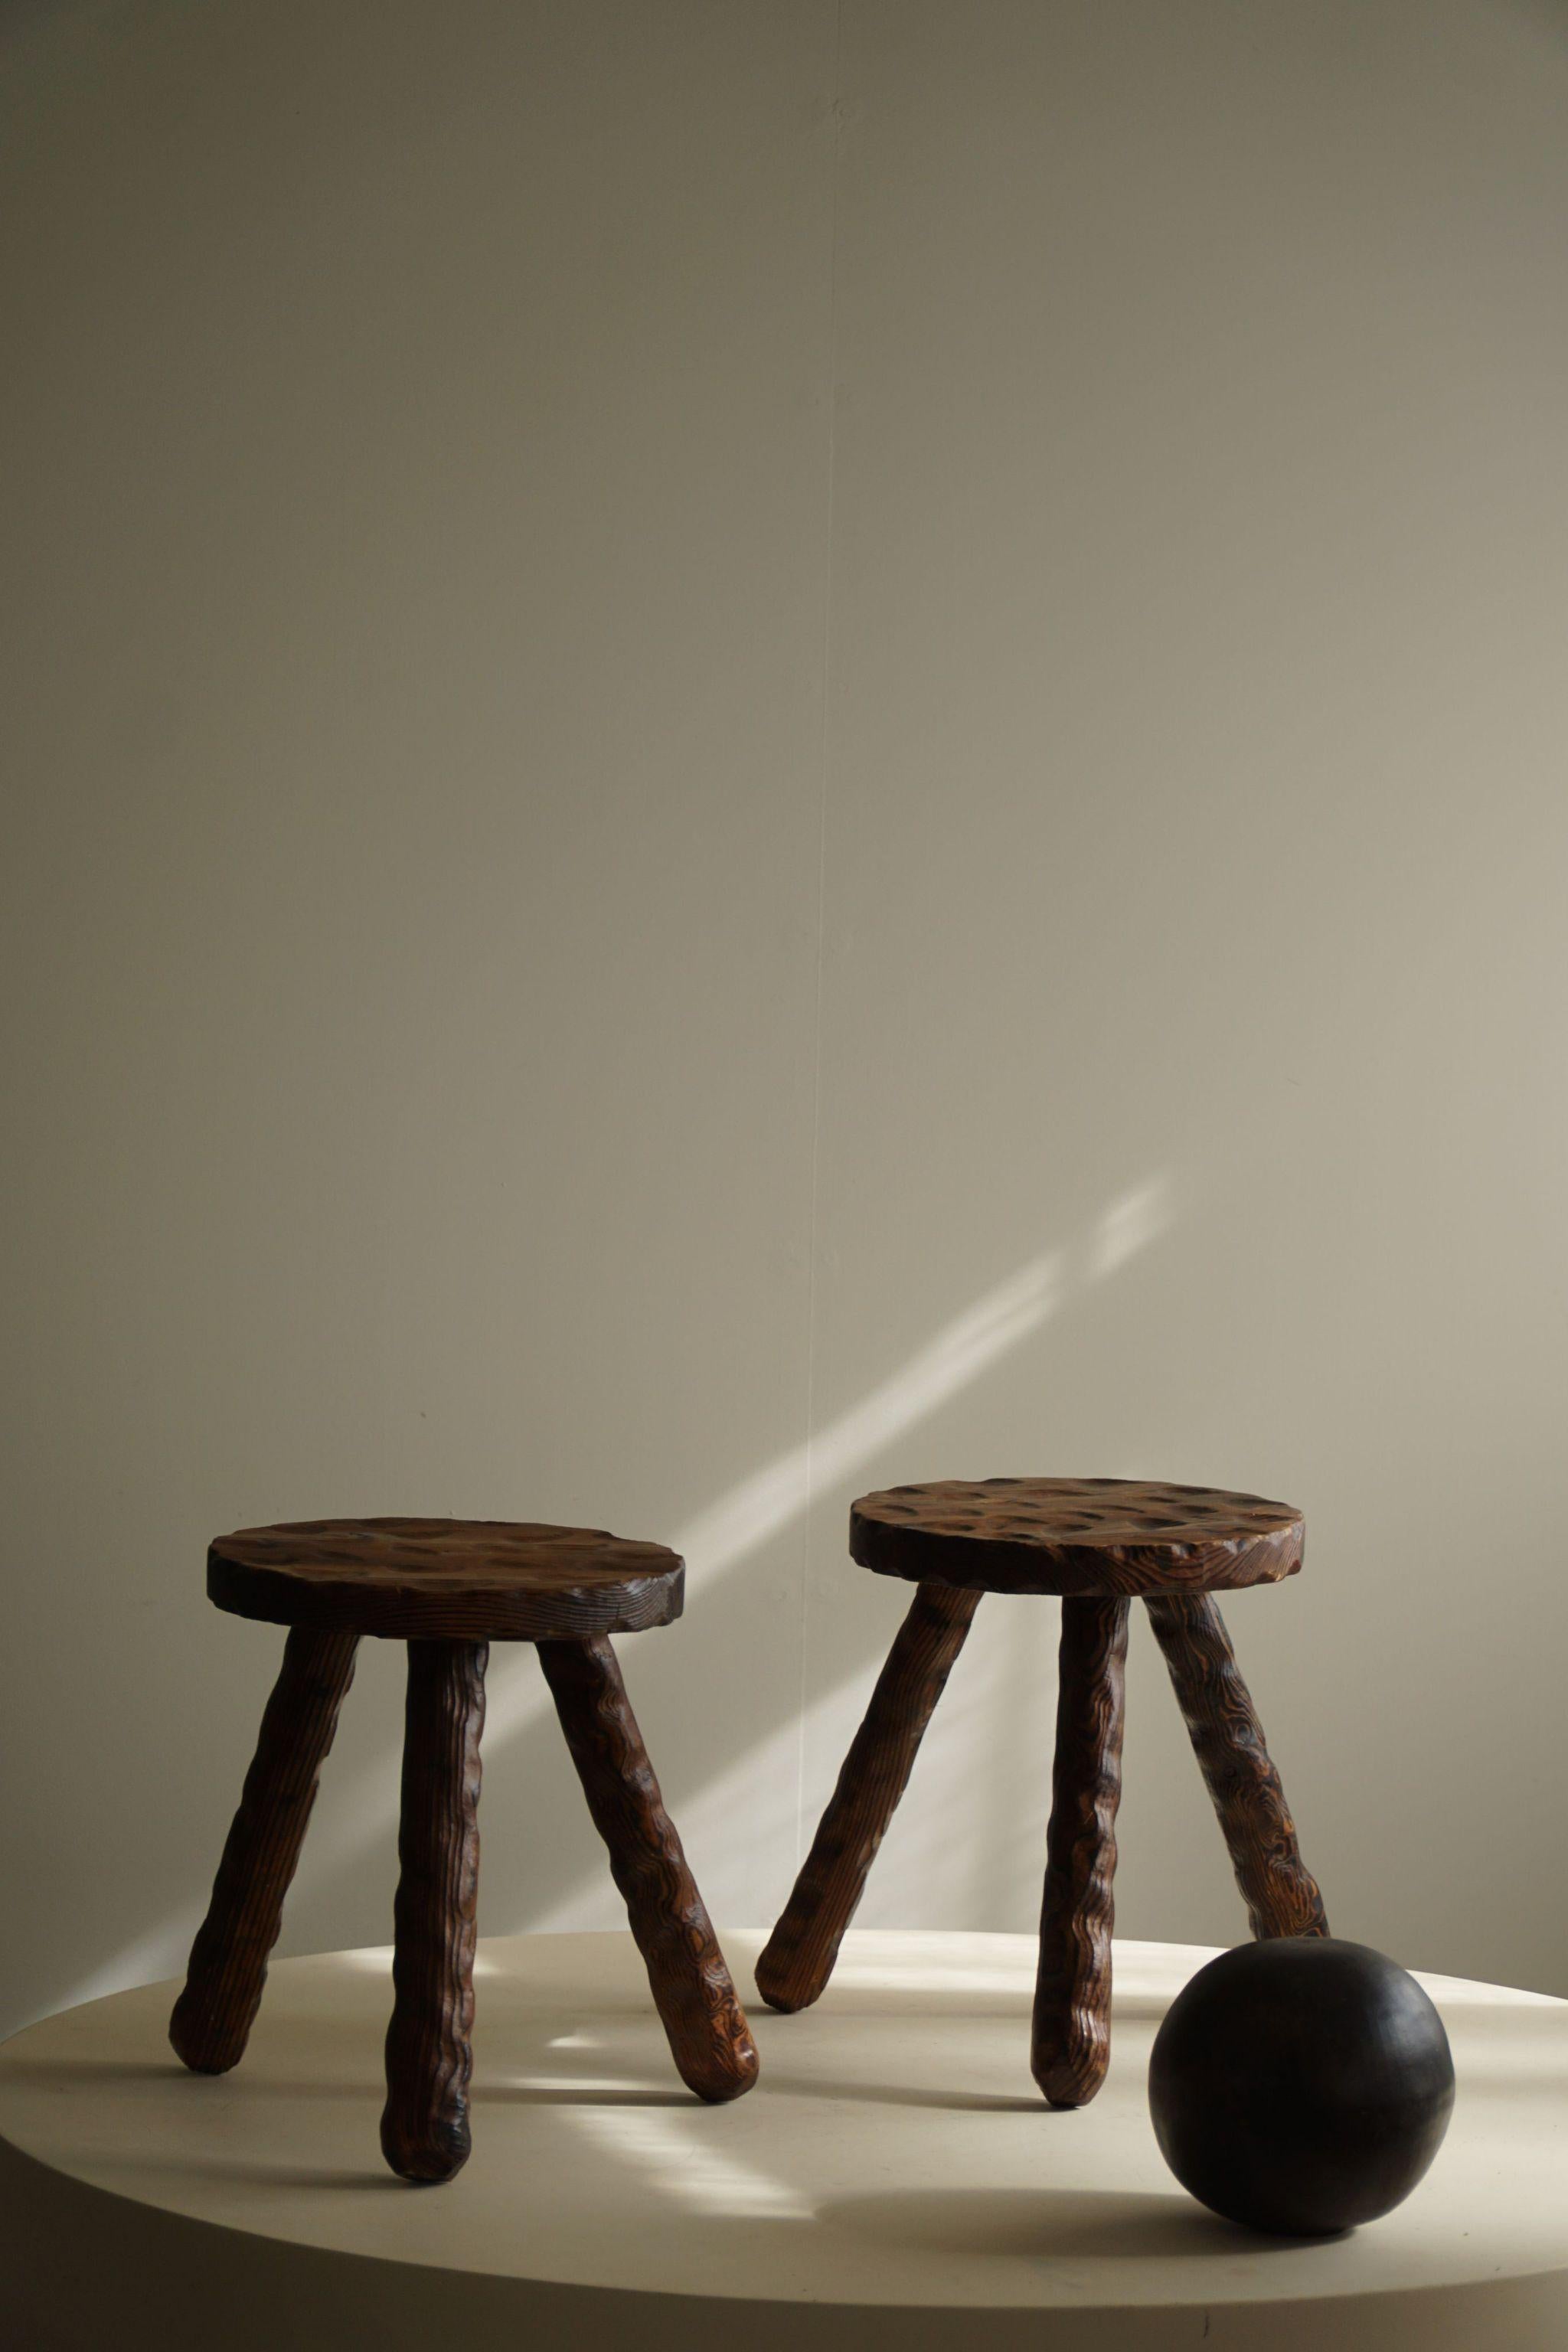 A Pair of Carved Wabi Sabi Stools in Pine, Swedish Mid Century Modern, 1960s For Sale 6